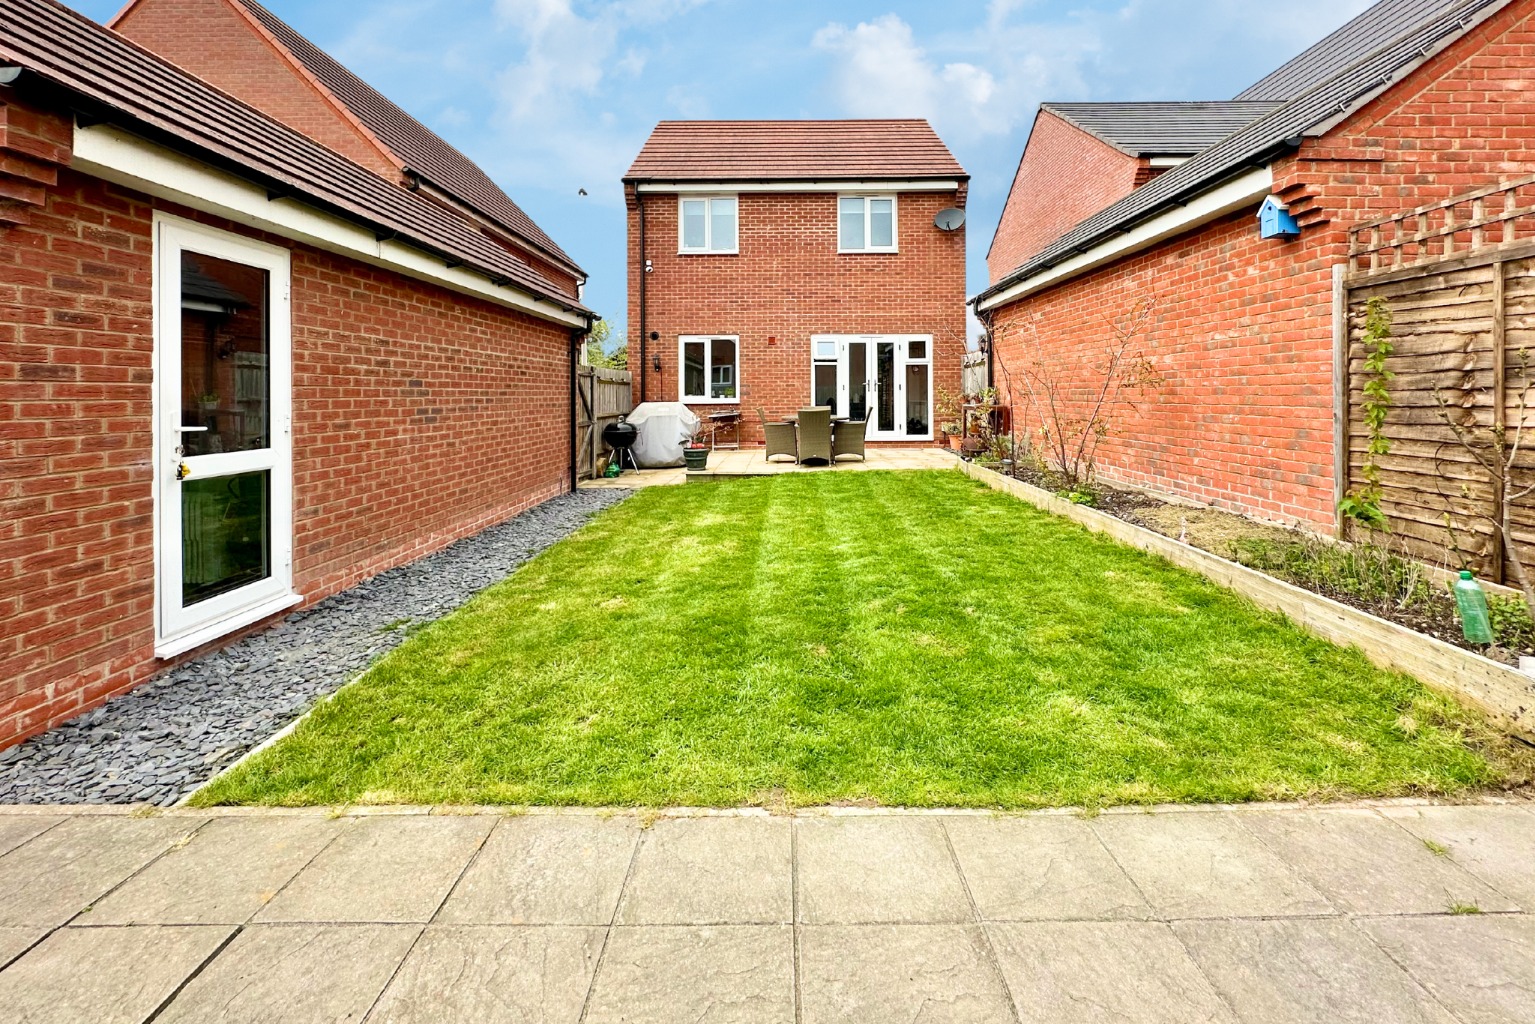 3 bed detached house for sale in Shinfield, Berkshire  - Property Image 2